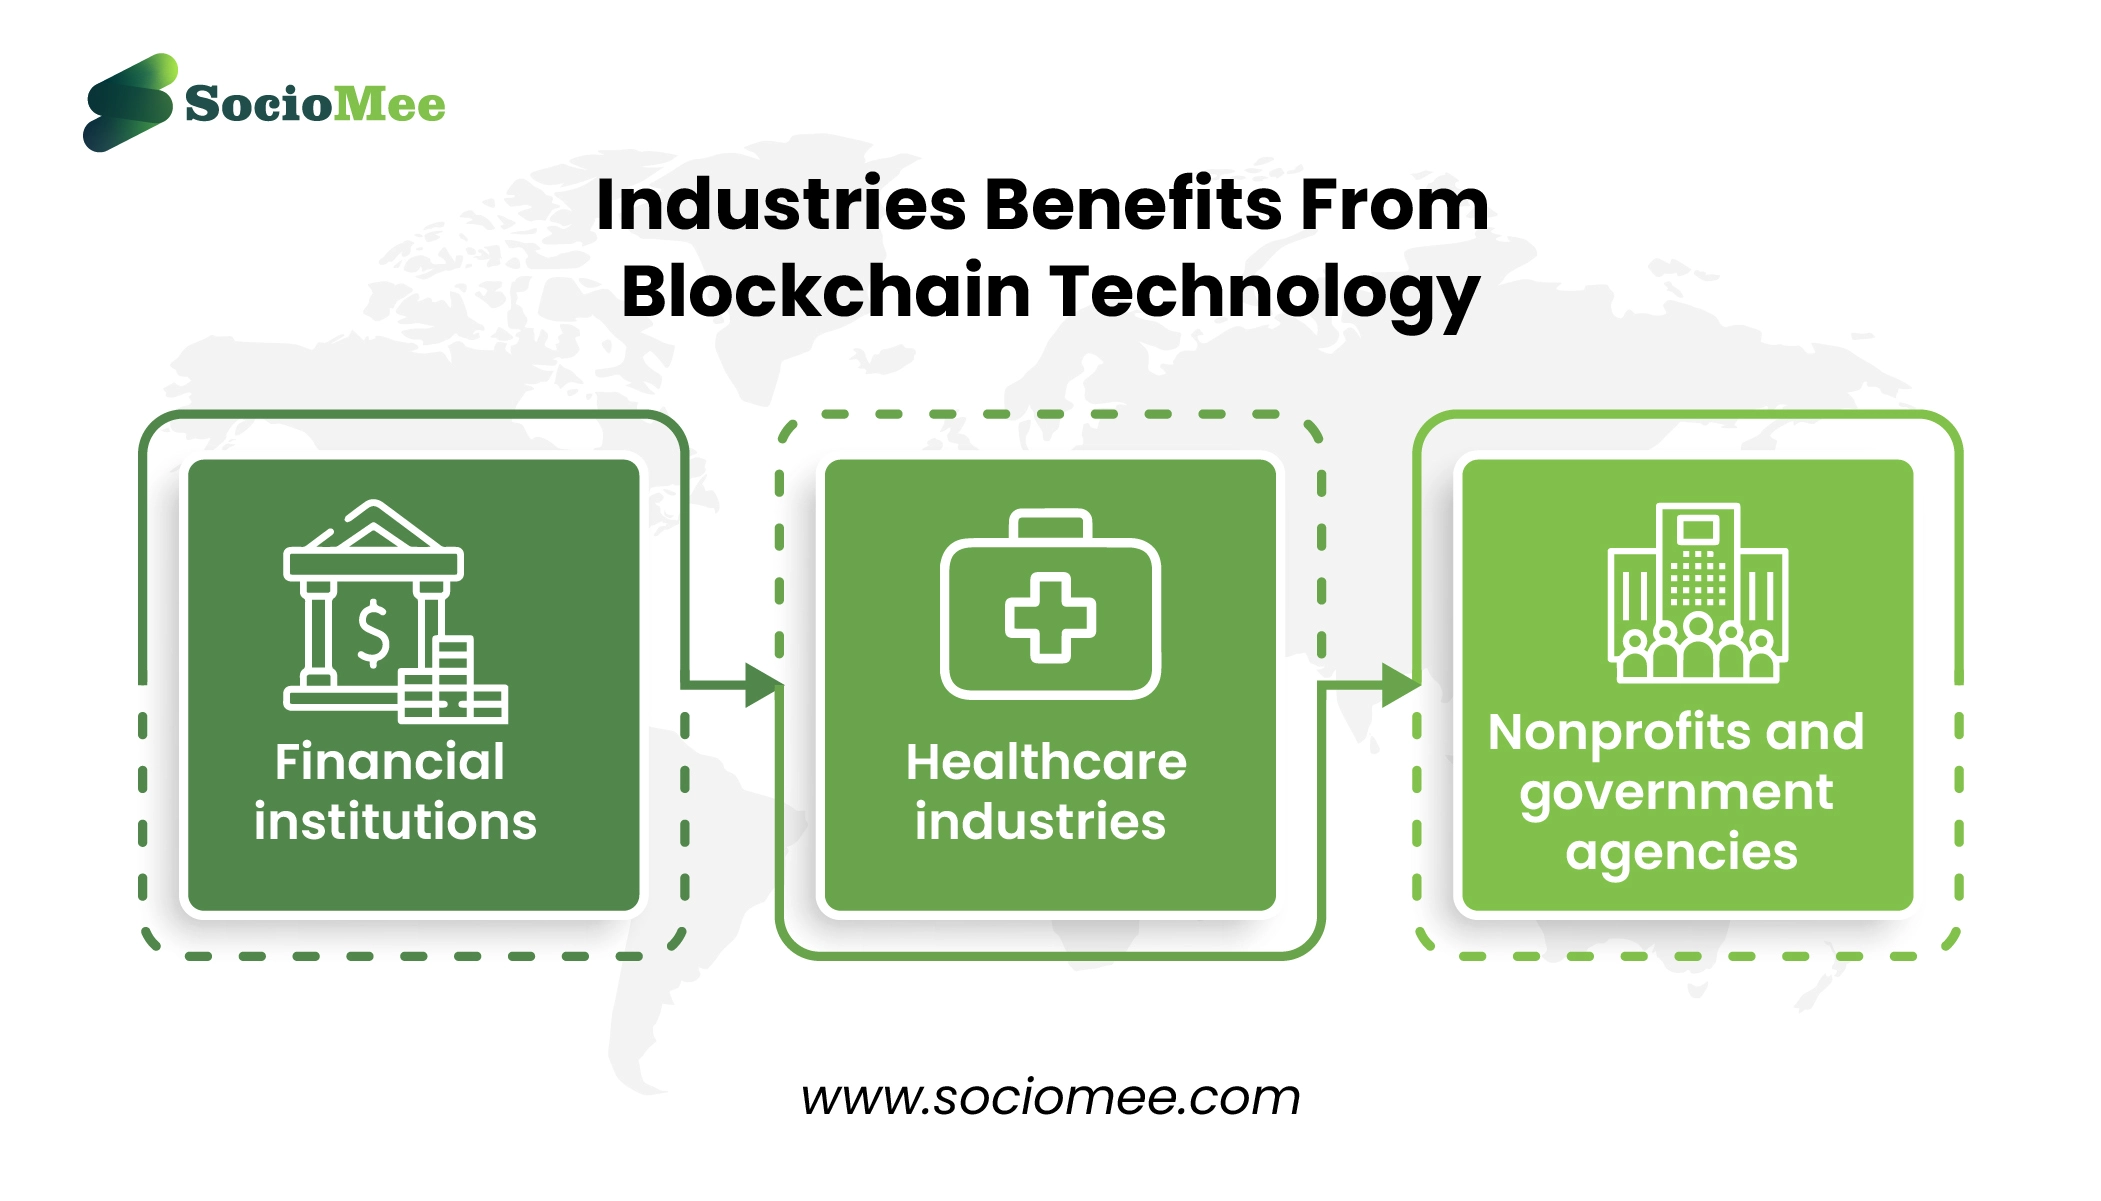 Industries Benefits From Blockchain Technology